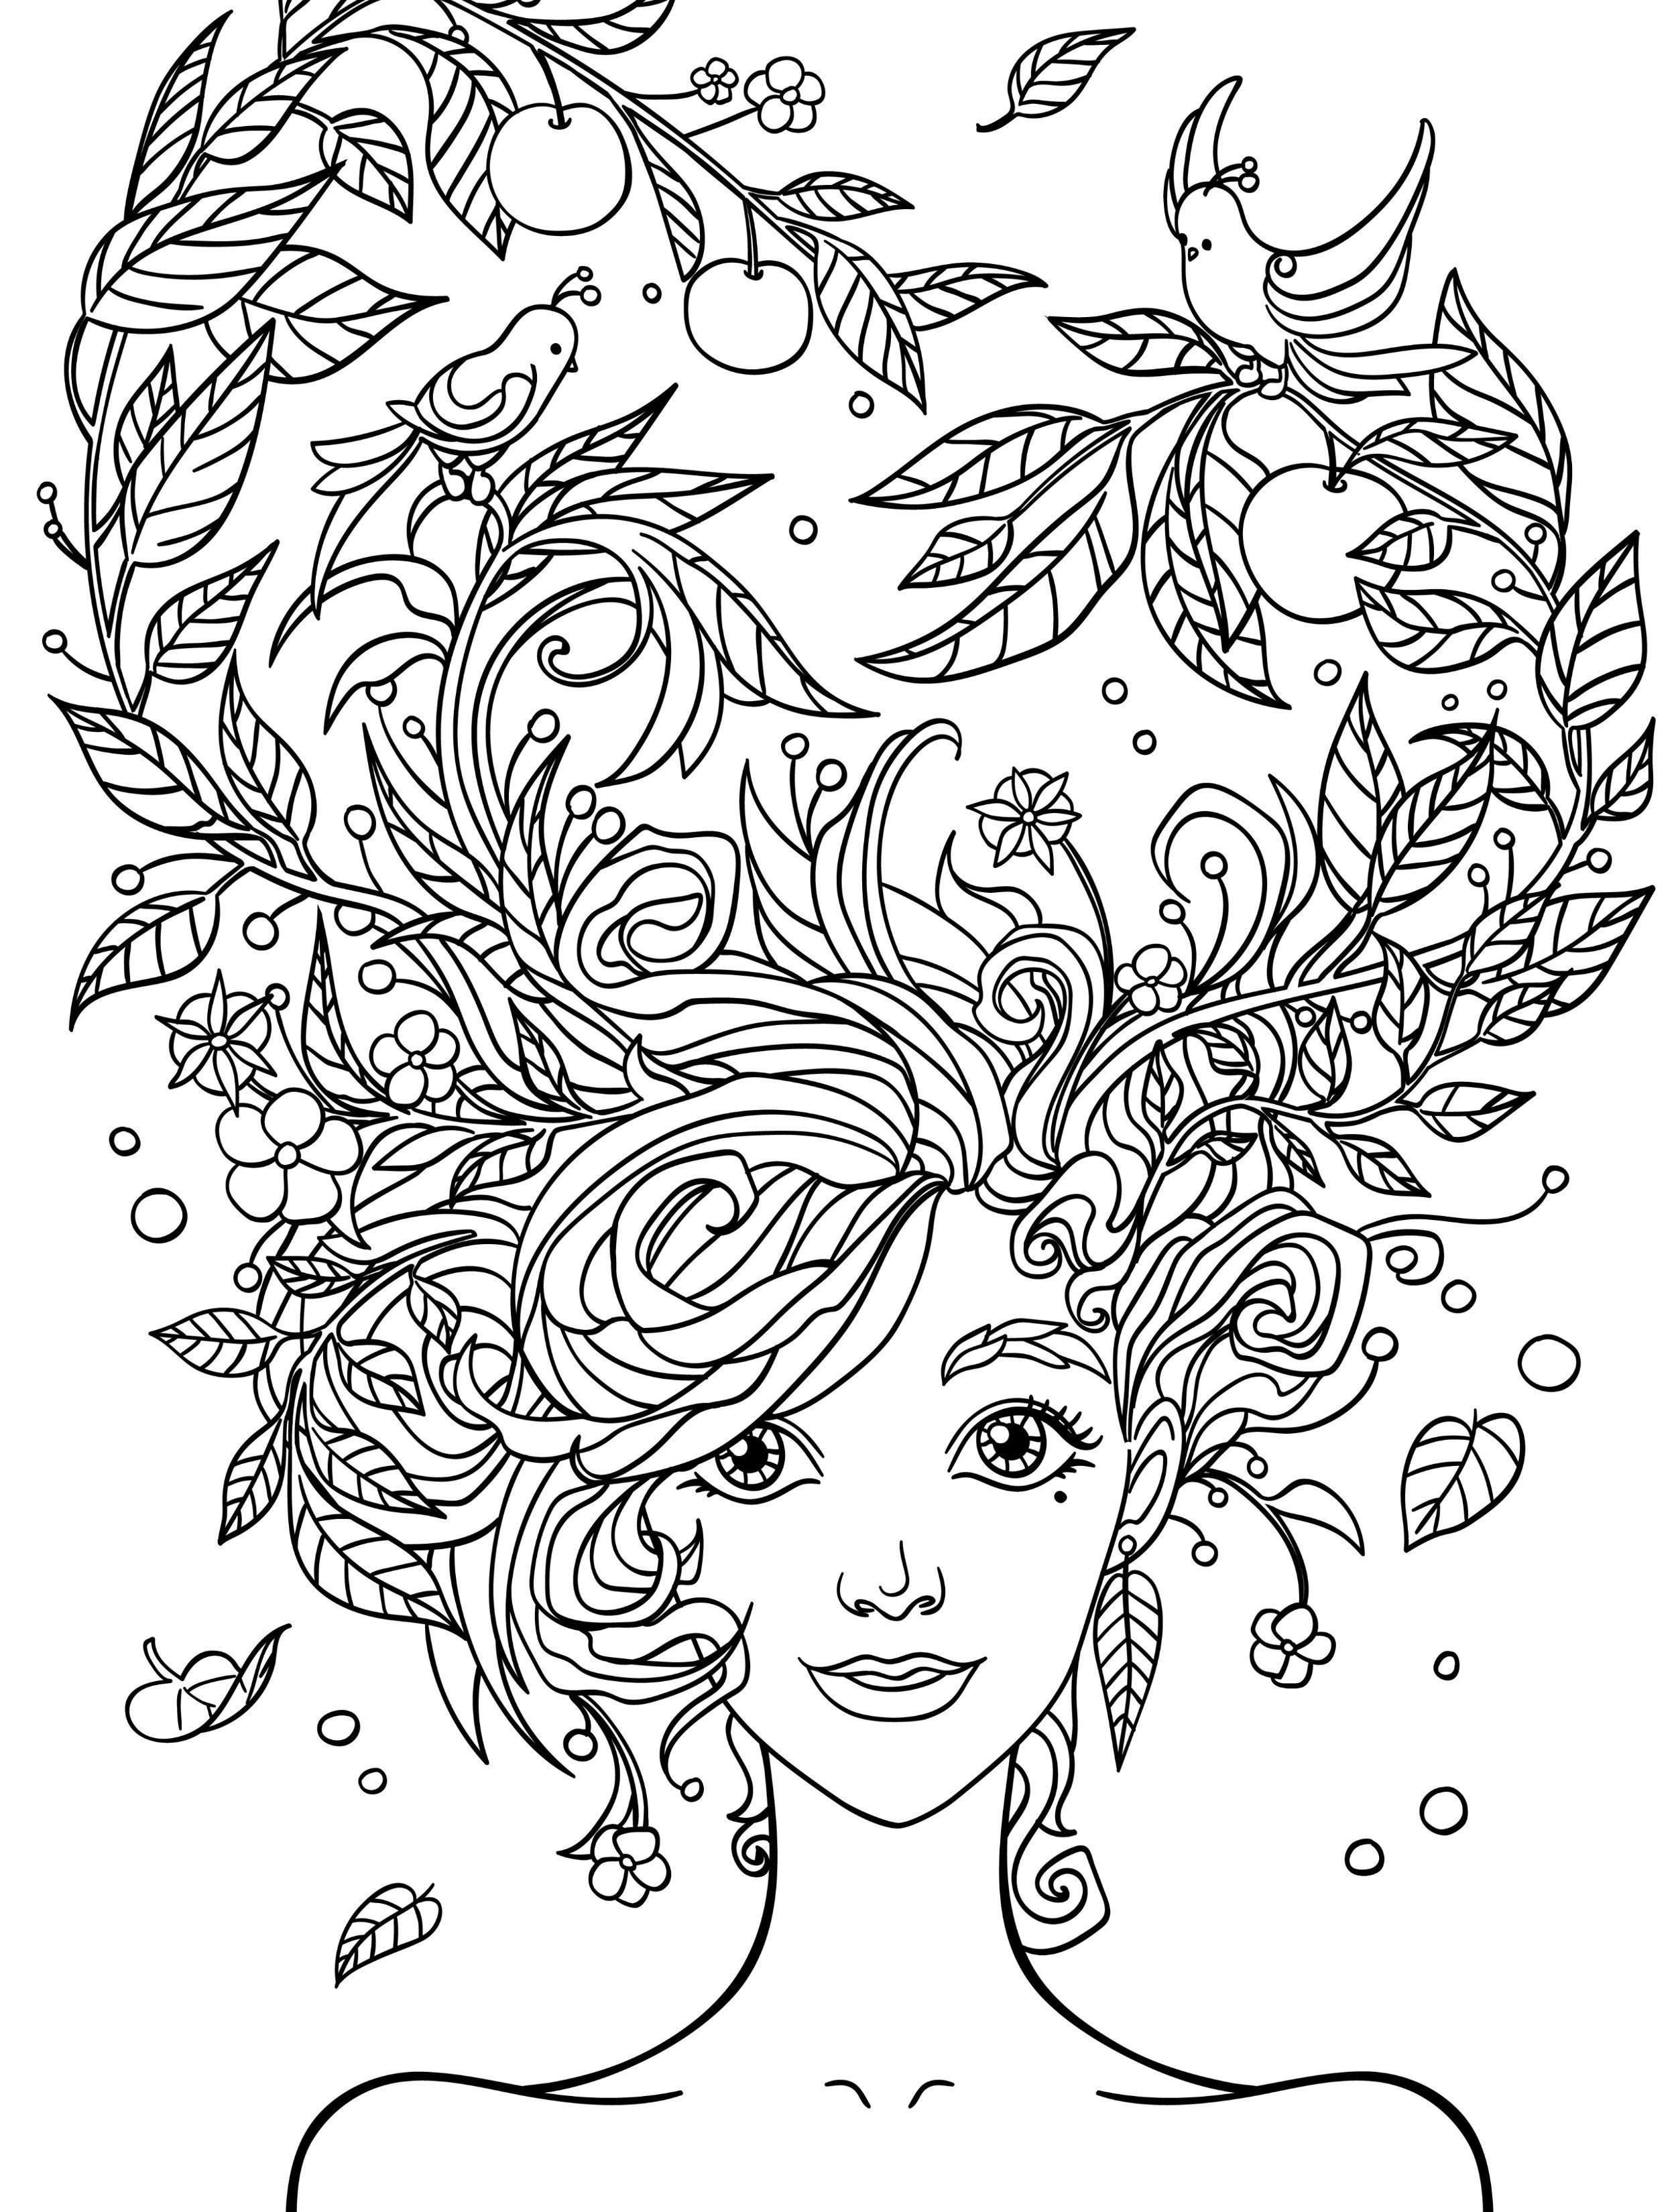 Pretty Coloring Pages For Adults Free Printable | People Coloring - Free Printable Coloring Book Pages For Adults